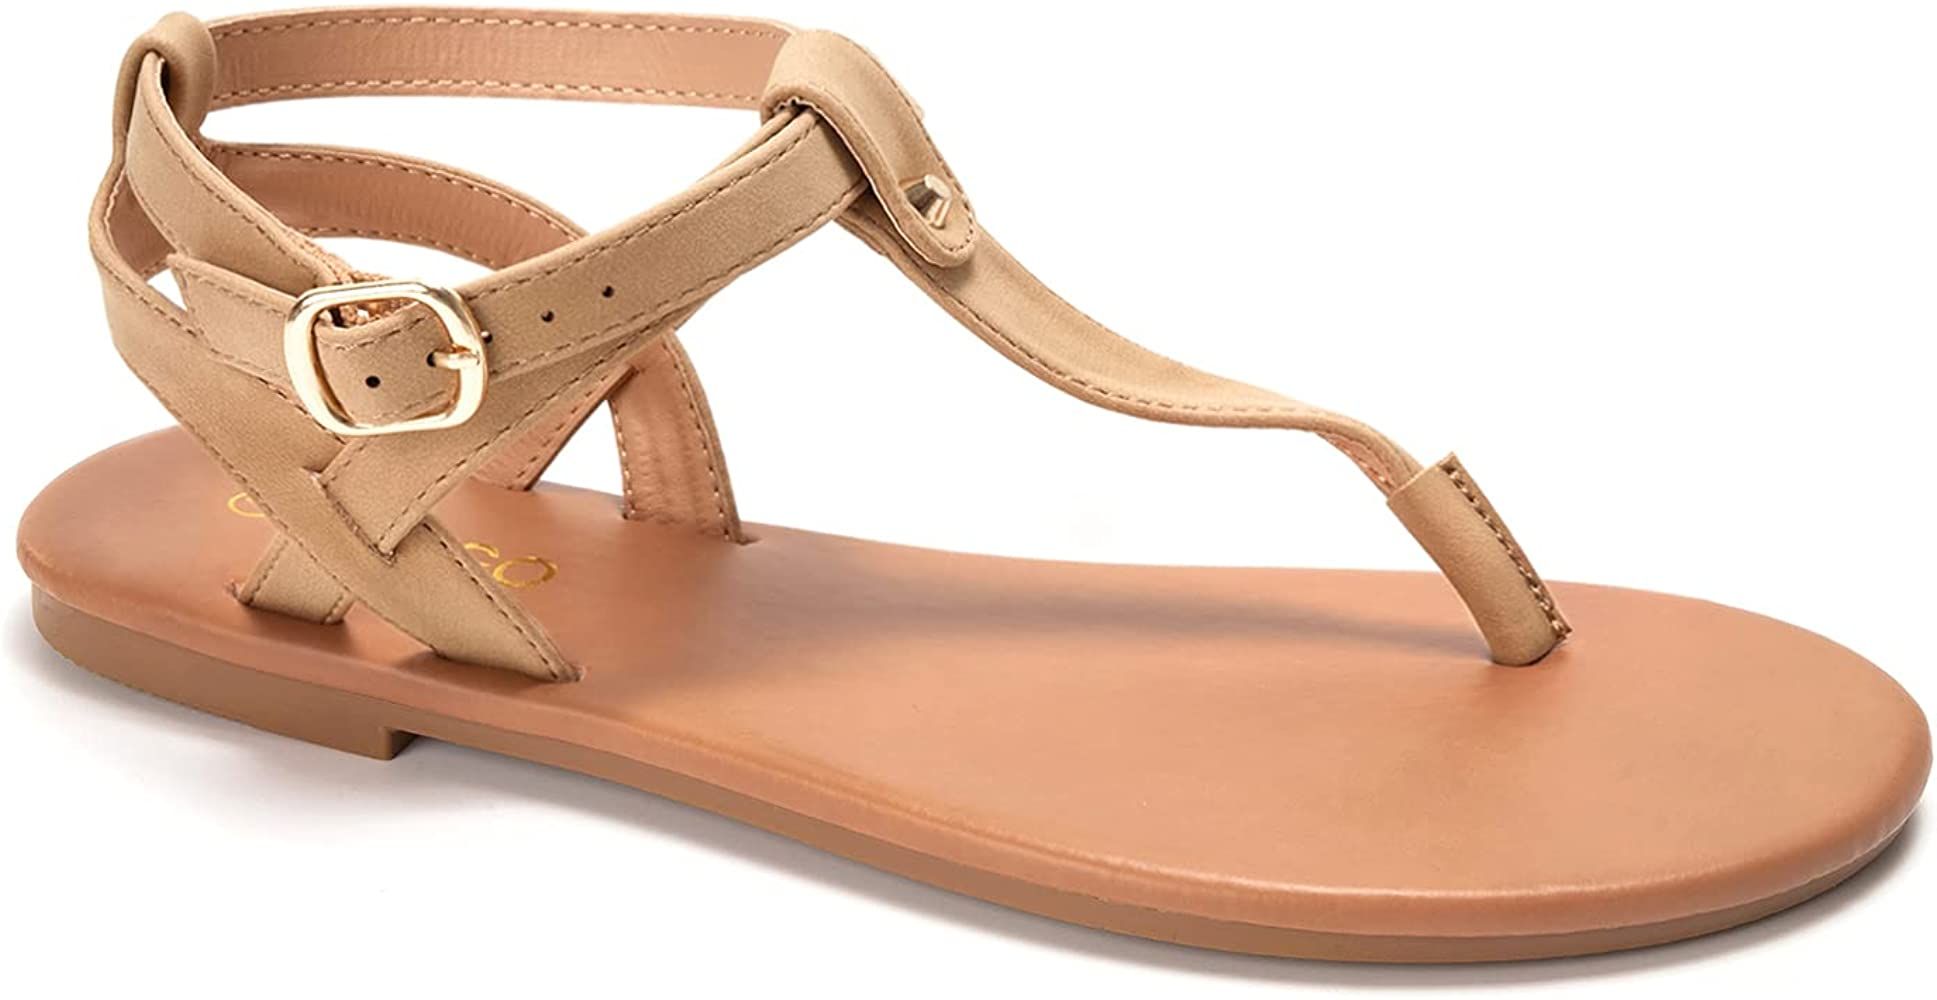 Thong Flat Sandals, Casual T Strap Dress Sandals, Adjustable Ankle Buckle Dress Thong Sandals with S | Amazon (US)